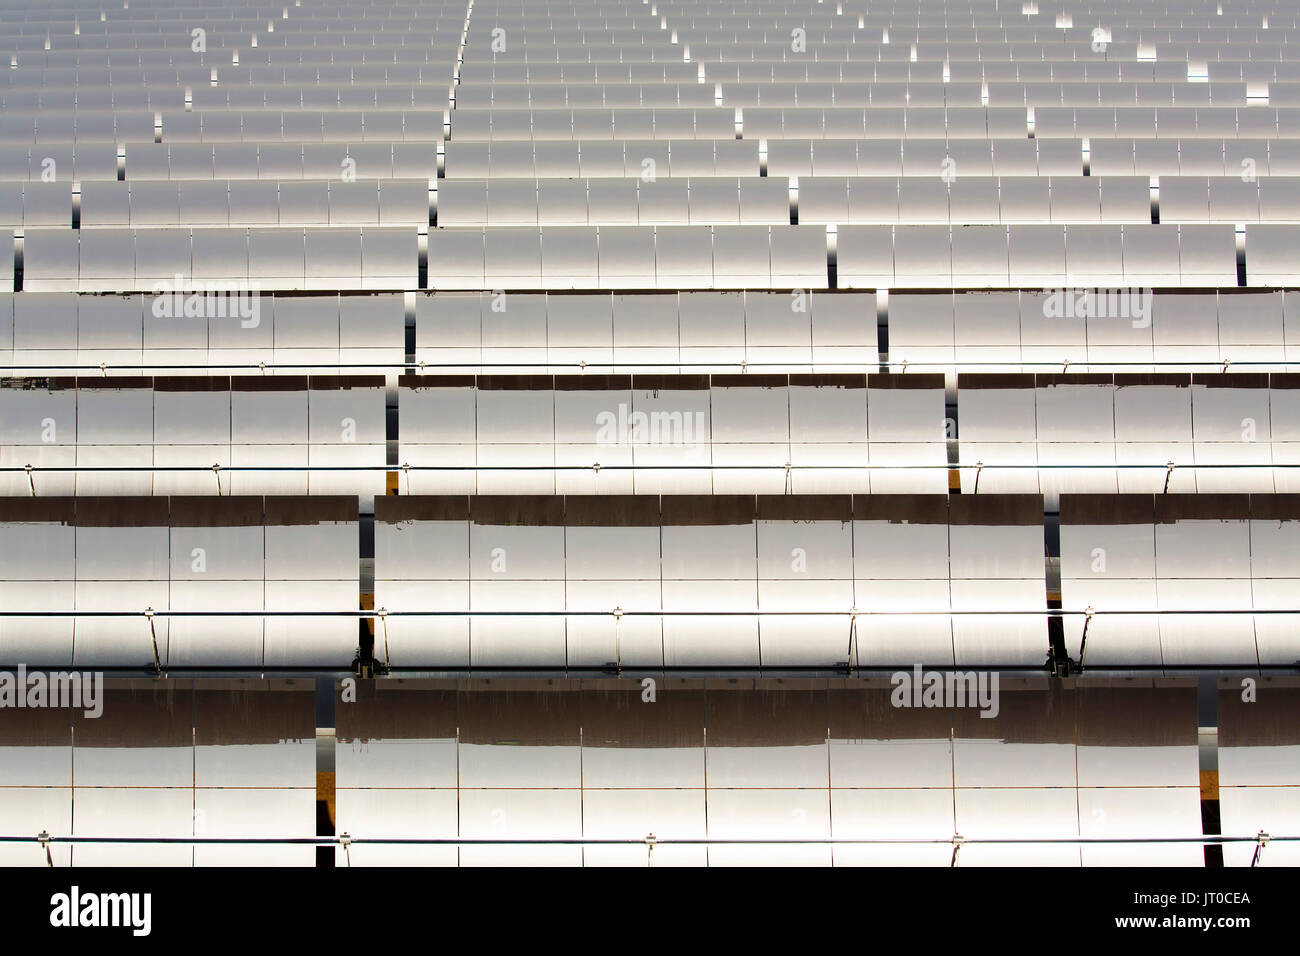 Solar thermal sustainable energy, Noor Ouarzazate Concentrated Solar Power Station Complex. Morocco, Maghreb North Africa Stock Photo